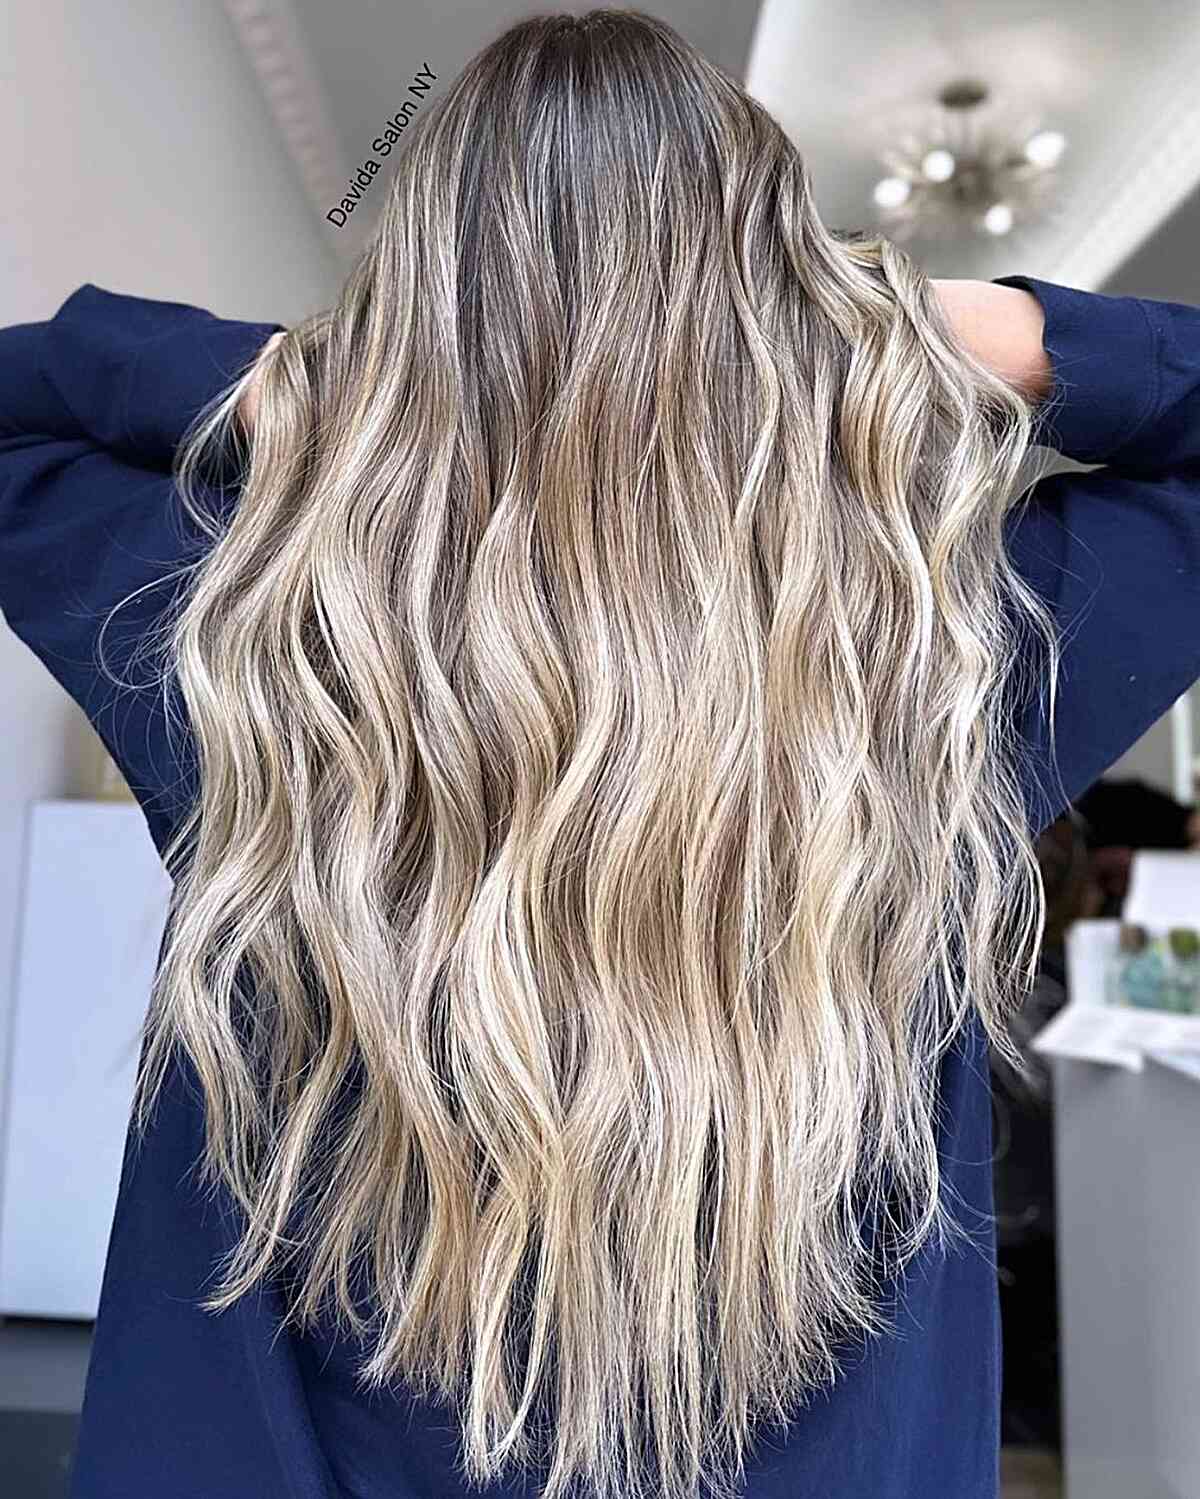 Icy Ash Blonde Balayage with Root Shadow and Long V-Shaped Cut